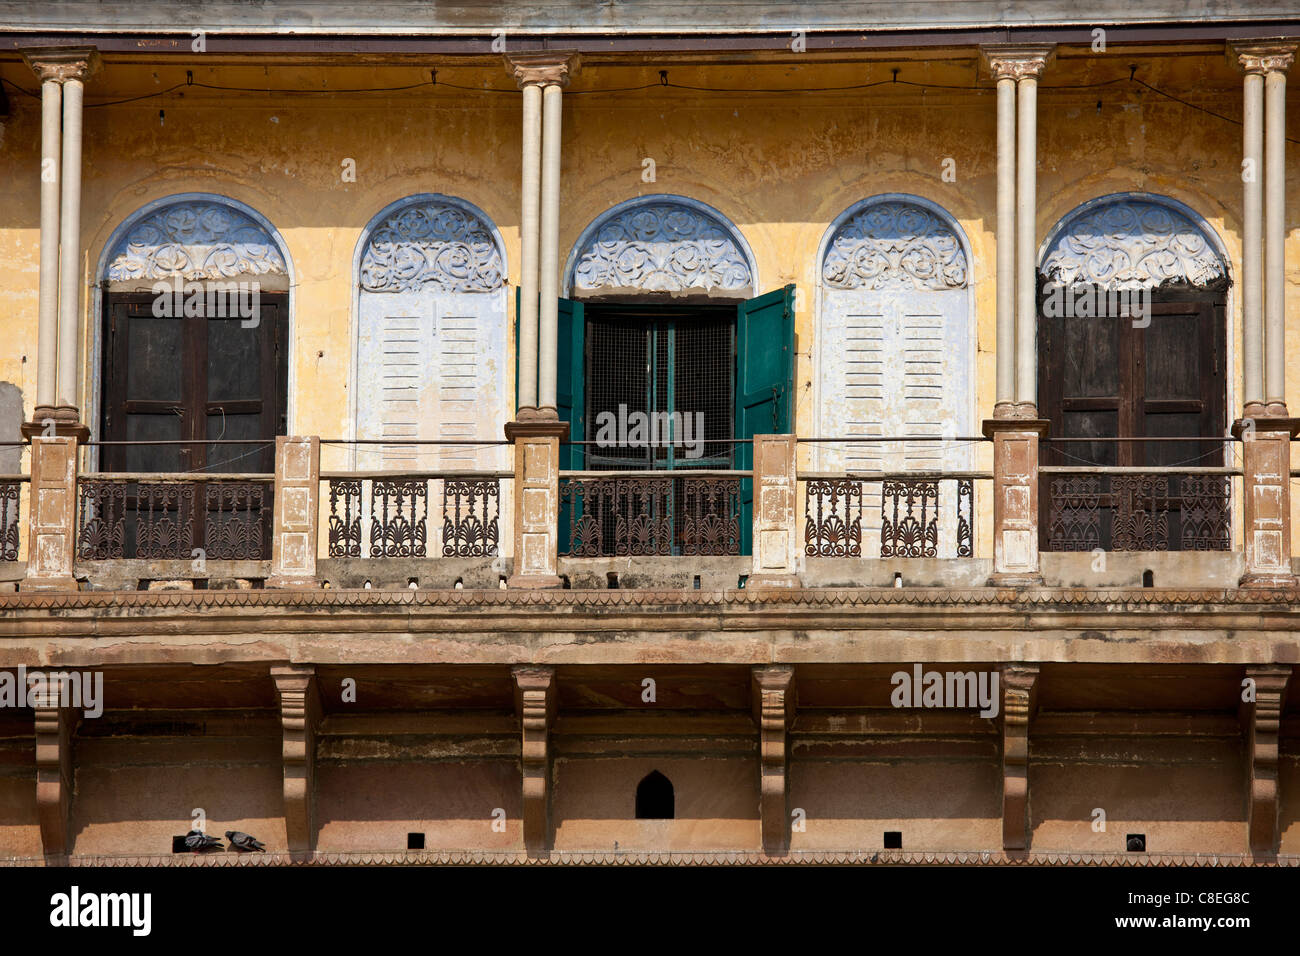 Indian architecture at the Ghats overlooking the Ganges River in City of Varanasi, Benares, Northern India Stock Photo